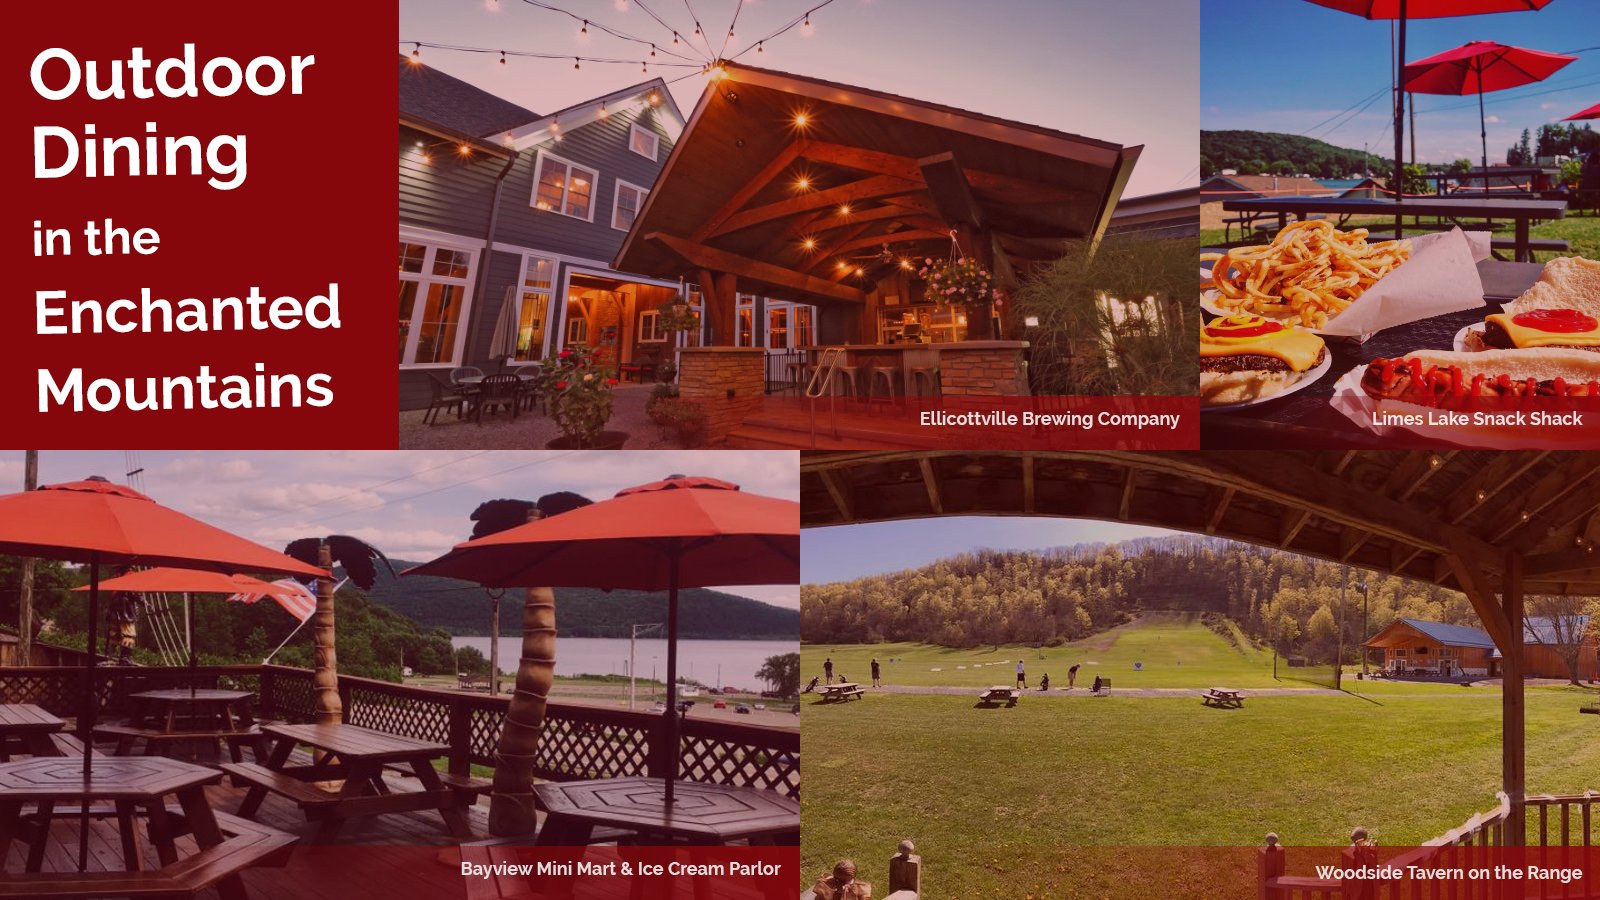 Outdoor Dining in the Enchanted Mountains: Ellicottville Brewing, Lime Lake Snack Shack, Bayview Mini Mart & Ice Cream Parlor, Woodside Tavern on the Range